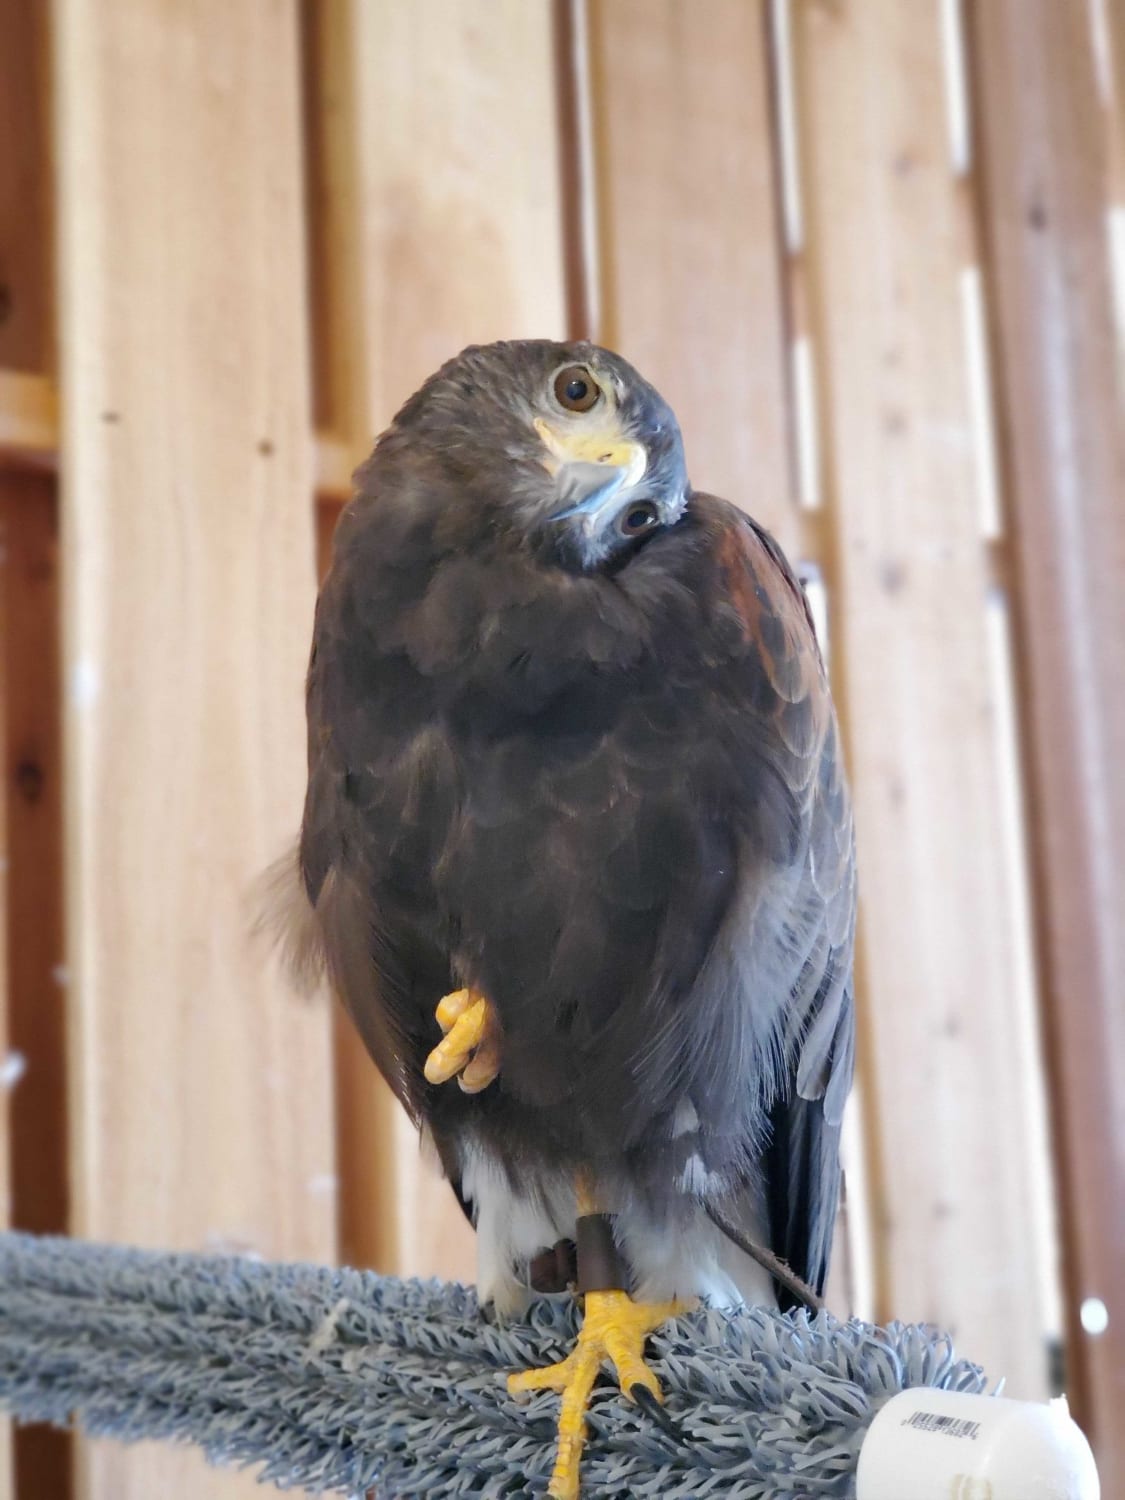 Harris's Hawks are social birds who live and hunt in "packs" as large as seven individuals. If one within their social unit is injured, the others may provide food and aid to the hurt individual.